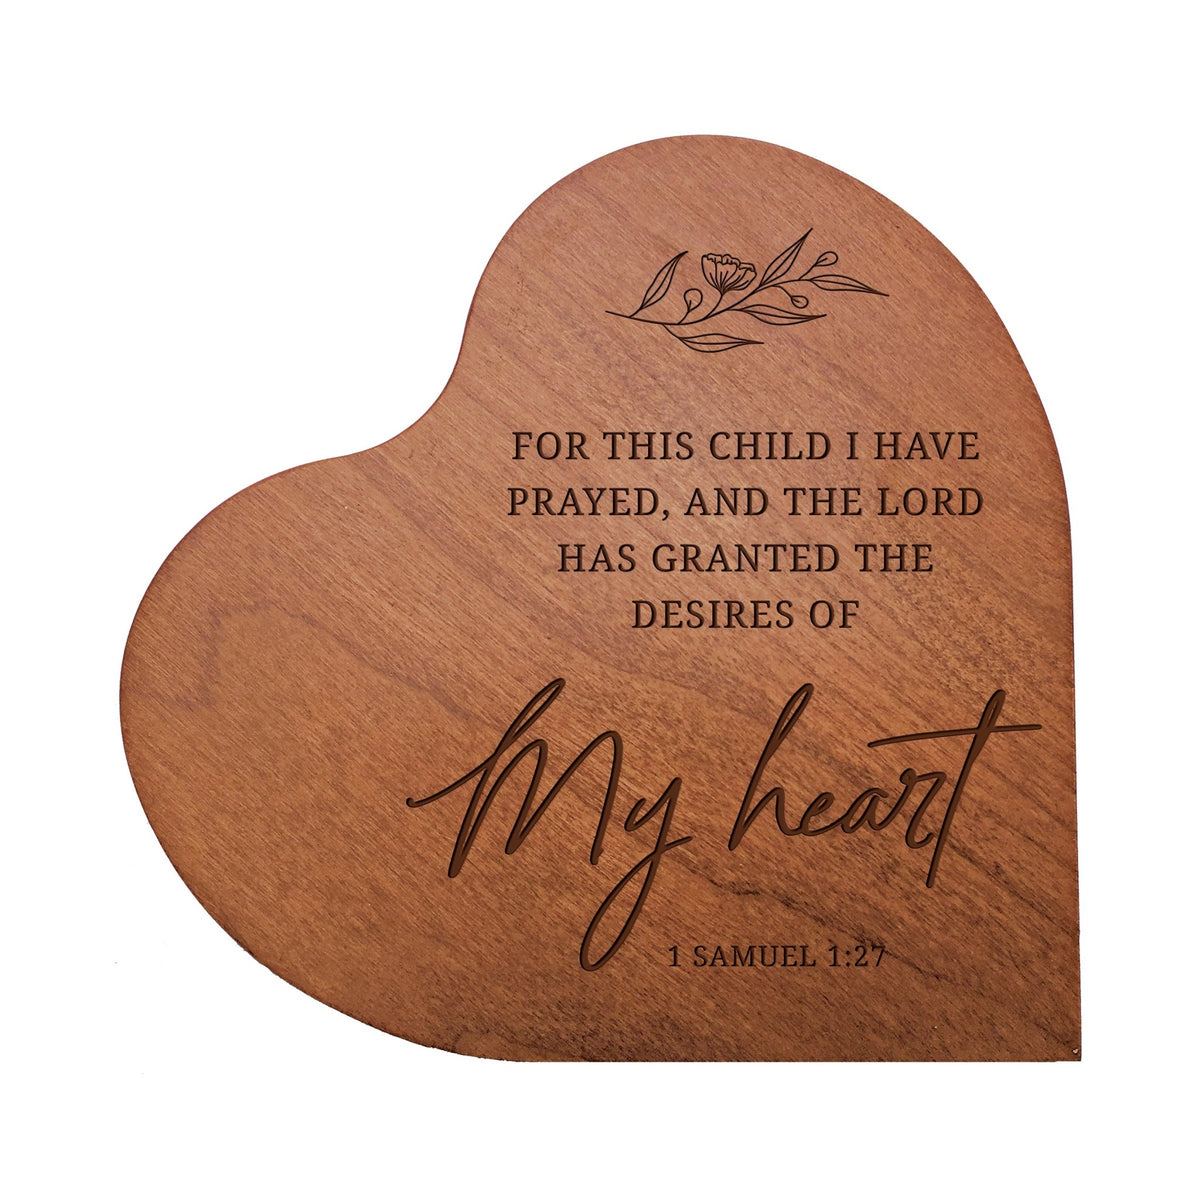 Modern Inspirational Wooden Solid Wood Heart Decoration 5x5.25 - For This Child, I Prayed - LifeSong Milestones